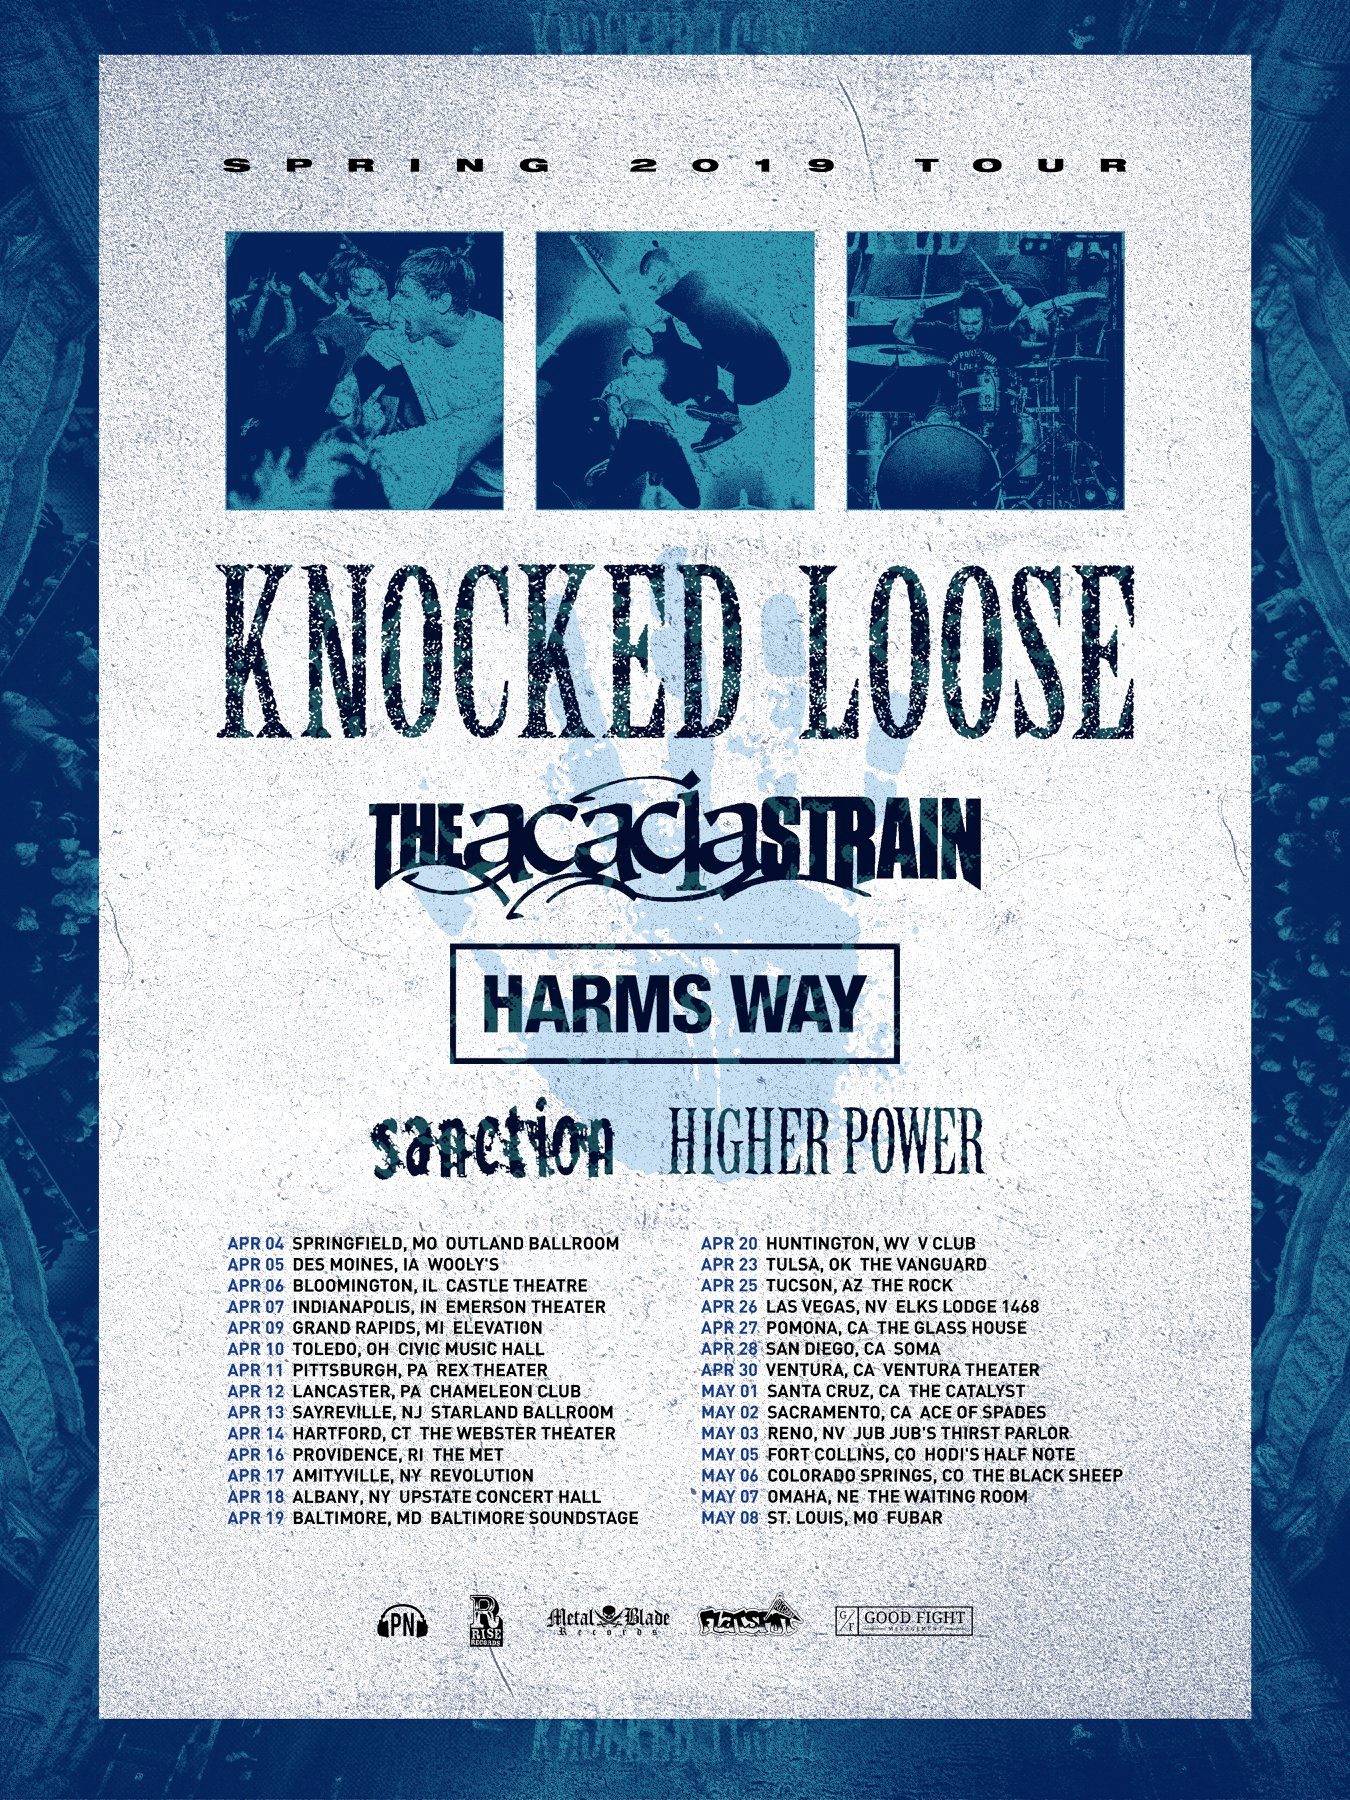 Knocked Loose announce U.S Spring Tour